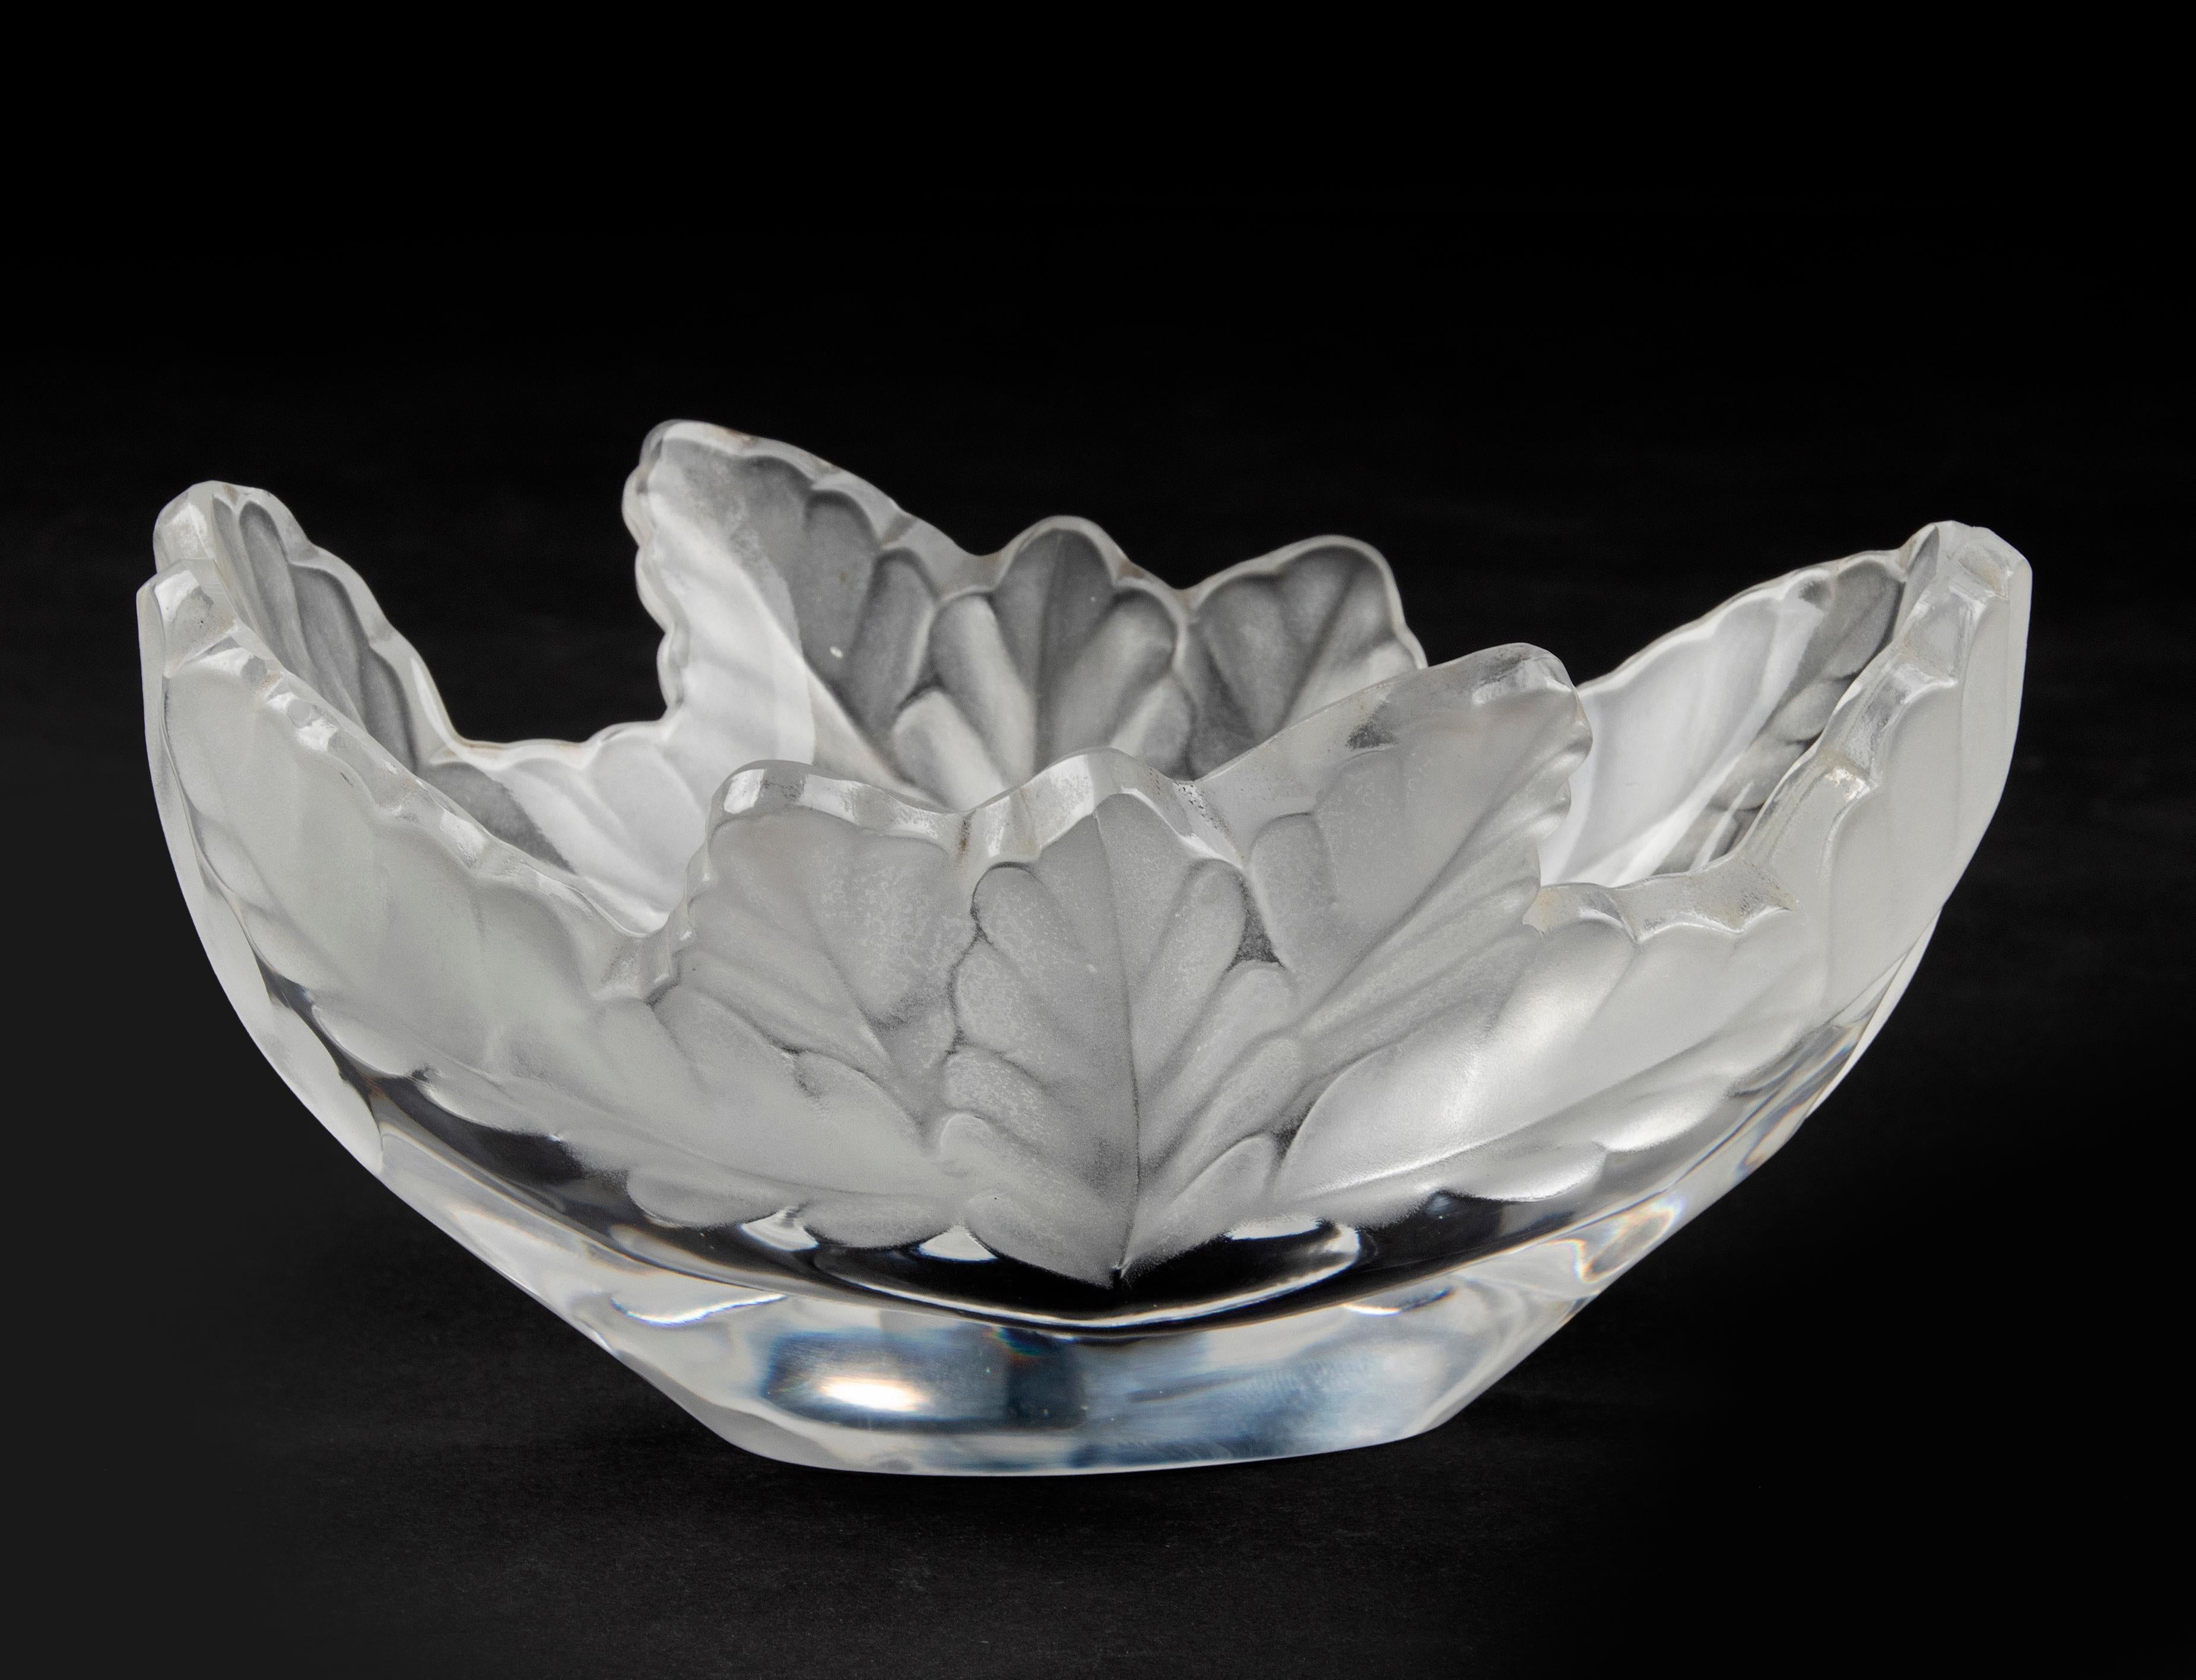 Beautiful crystal bowl from the French brand Lalique. The crystal has the shape of oak leaf and is satin-finished on the outside. The model's name is 'Compiegne'. The bowl is marked on the bottom with an etched sign 'Lalique France'. The bowl is in